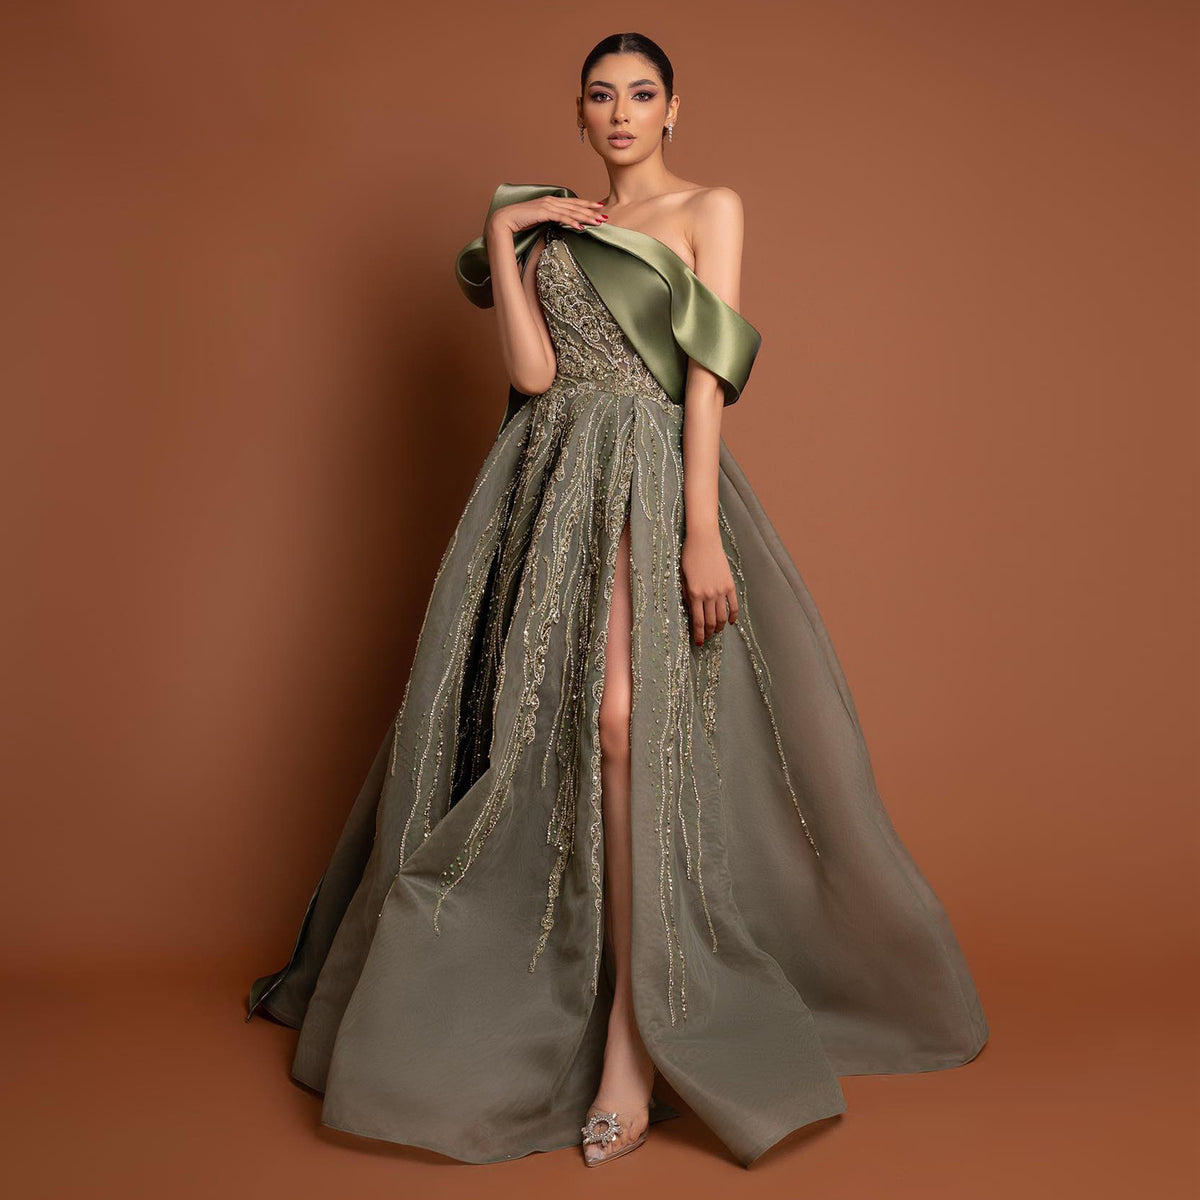 Sharon Said Luxury Dubai One Shoulder Olive Green Arabic Evening Dress with Cape Sleeves Side Slit Wedding Party Gowns SS323